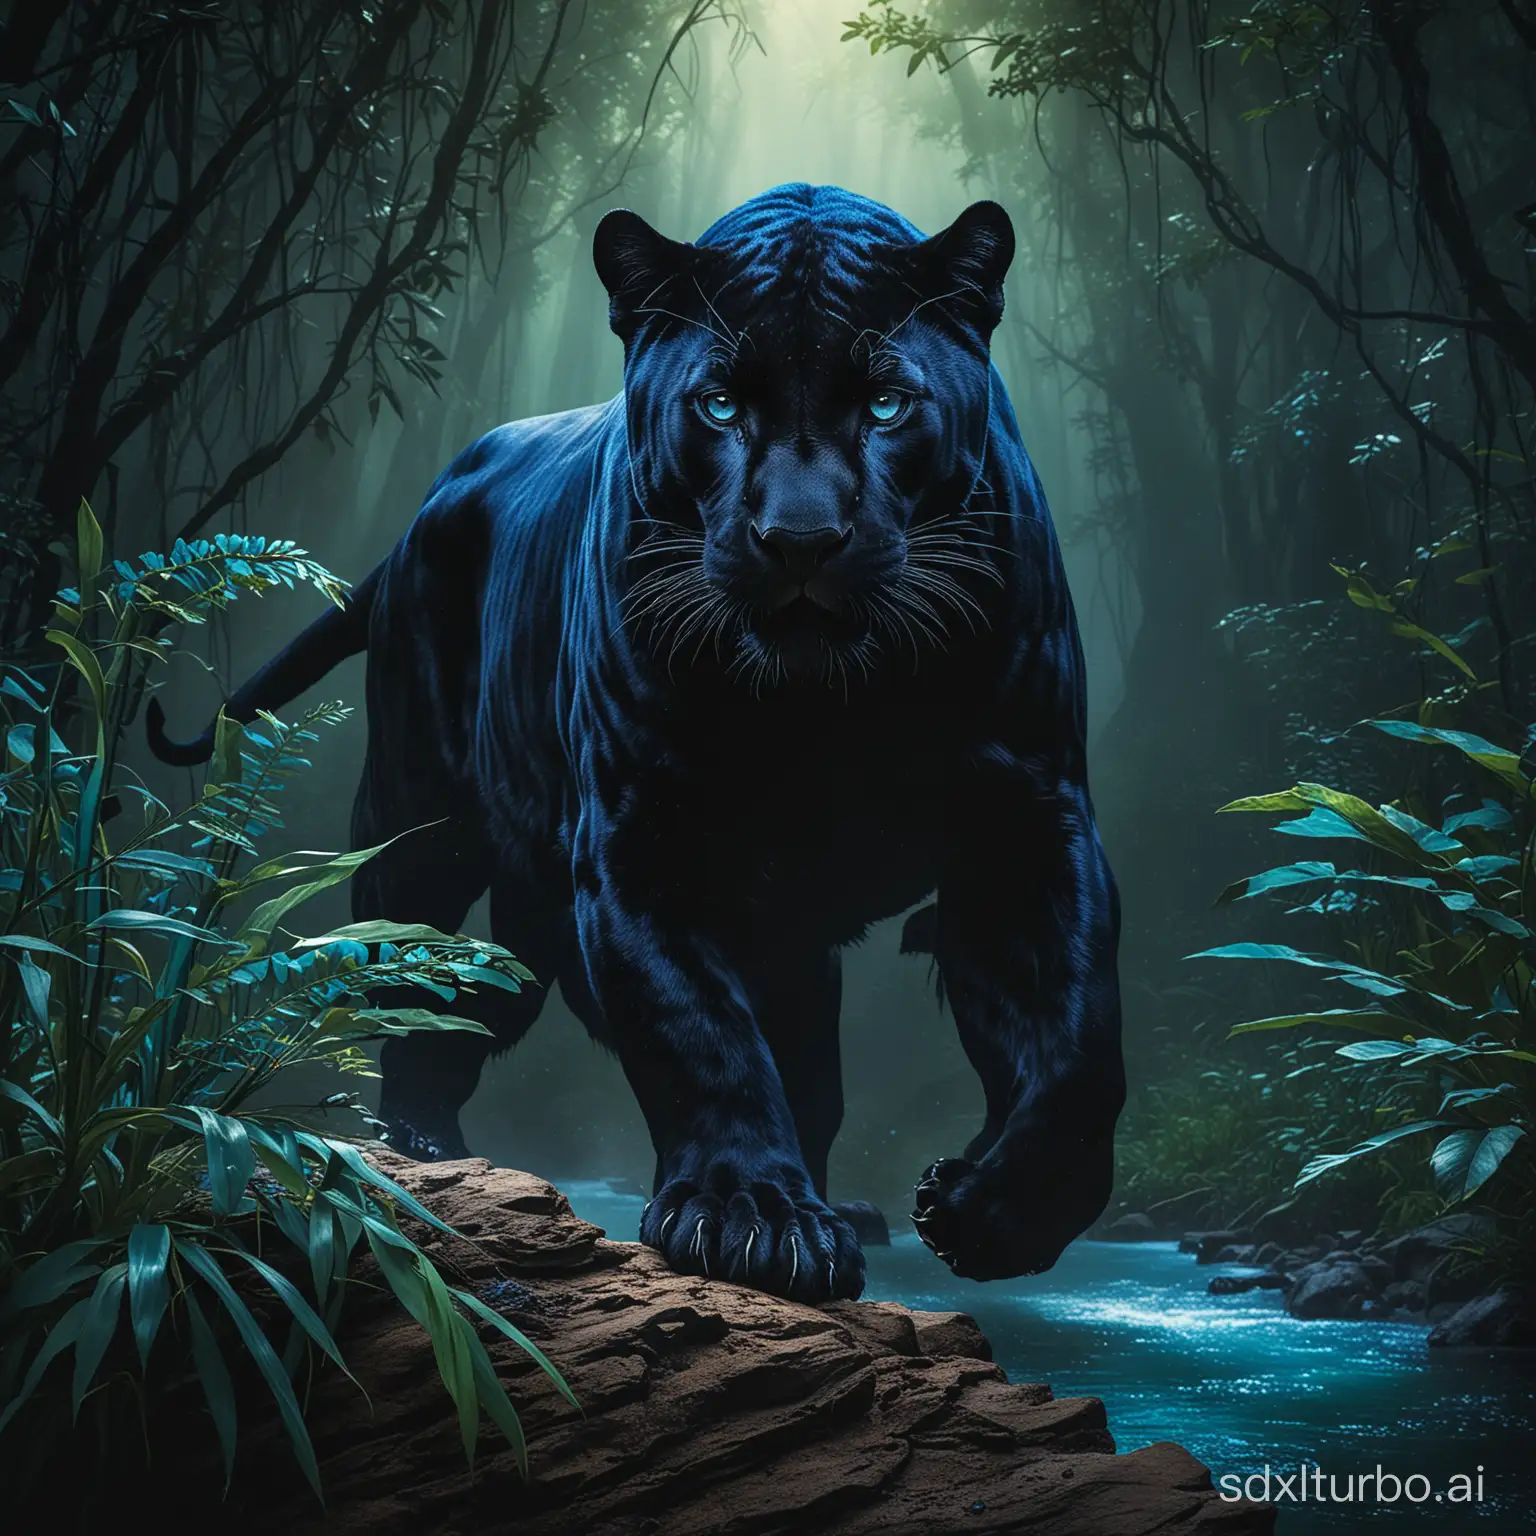 Dynamic-Composition-of-a-Majestic-Black-Panther-in-Cobalt-Blue-Lighting